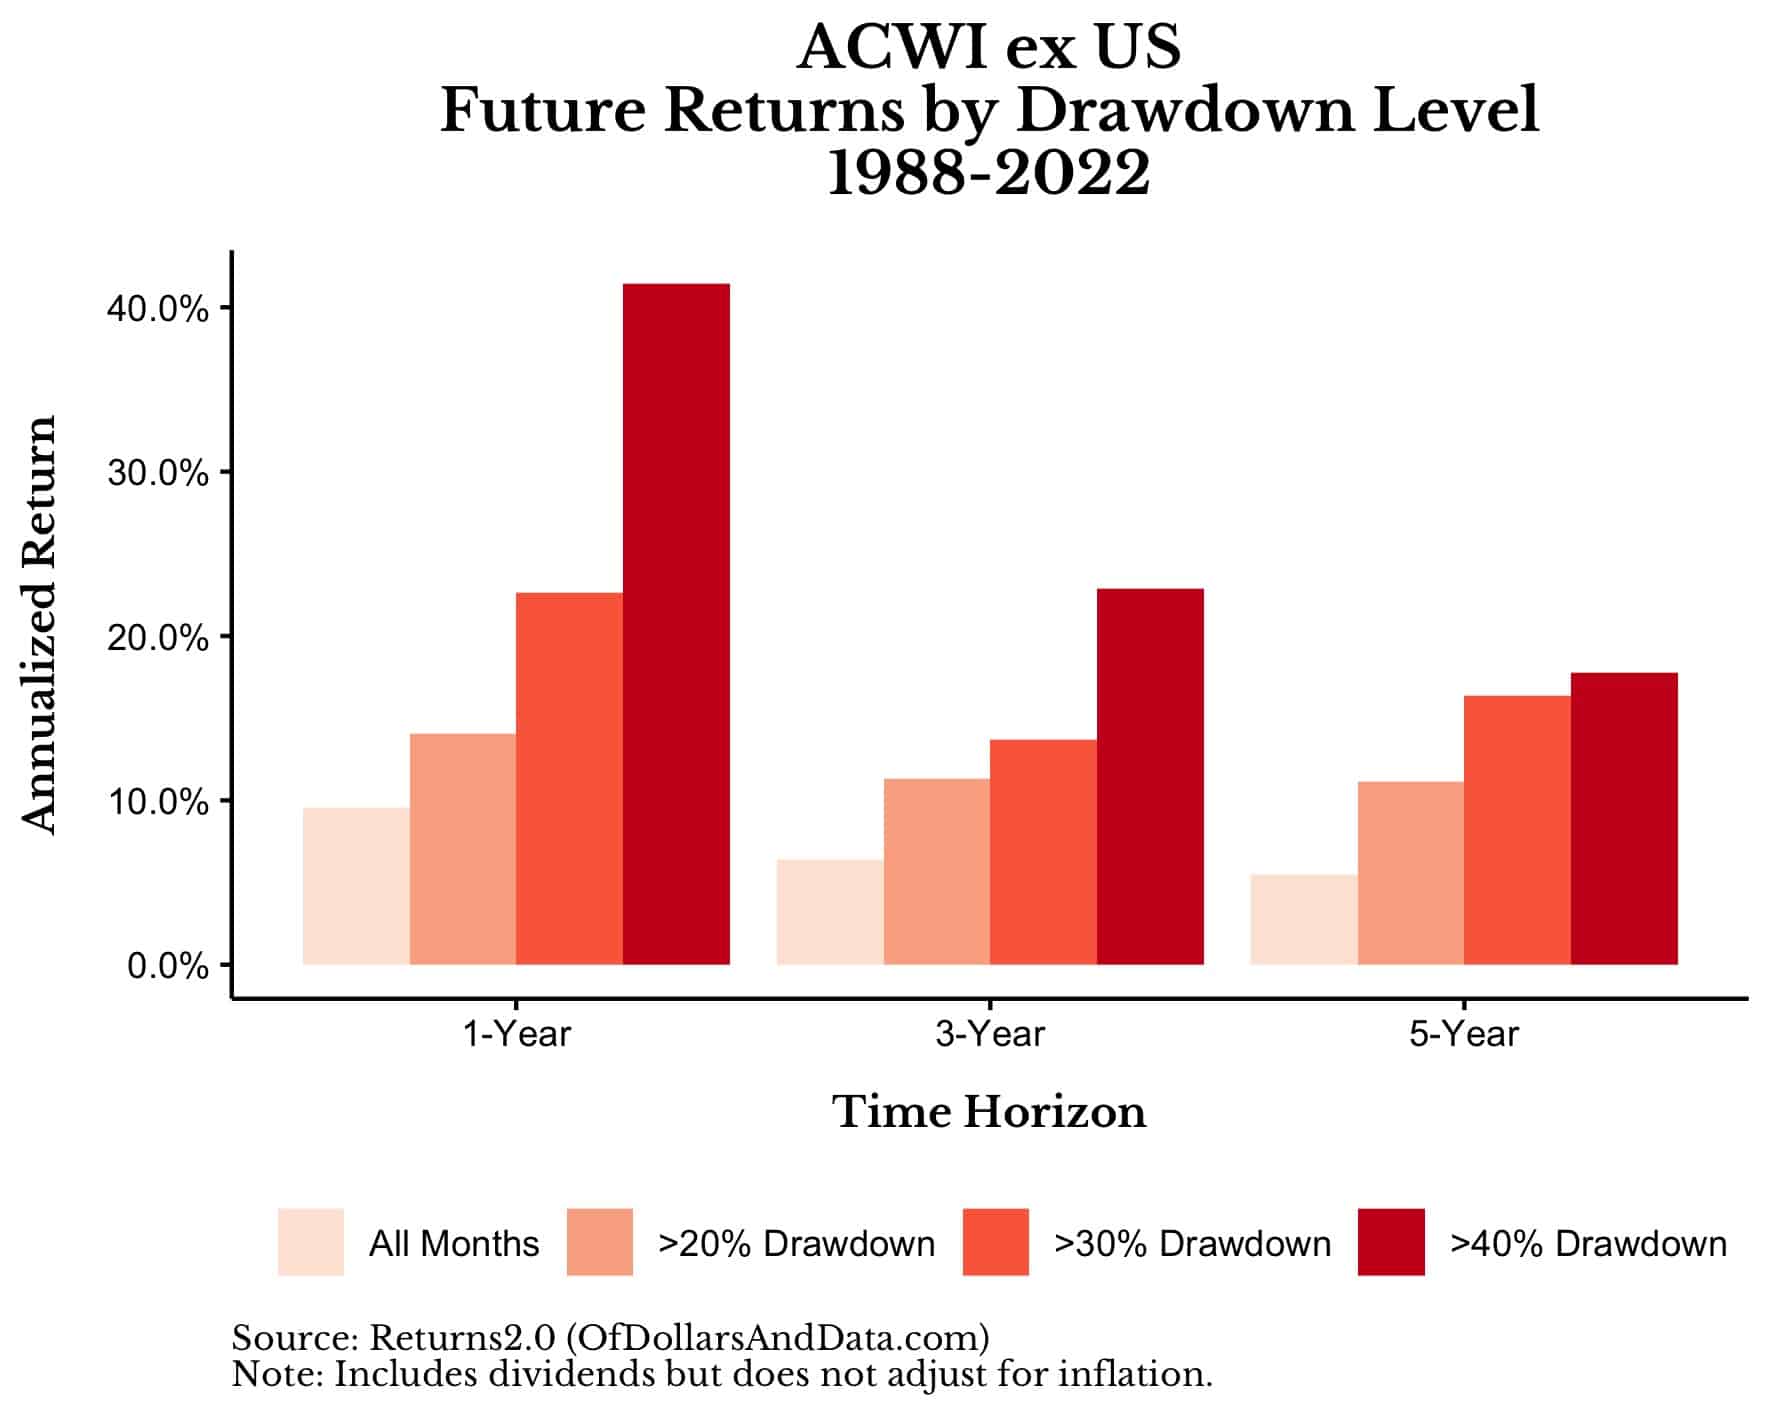 ACWI ex US future returns by drawdown level from 1926-2022